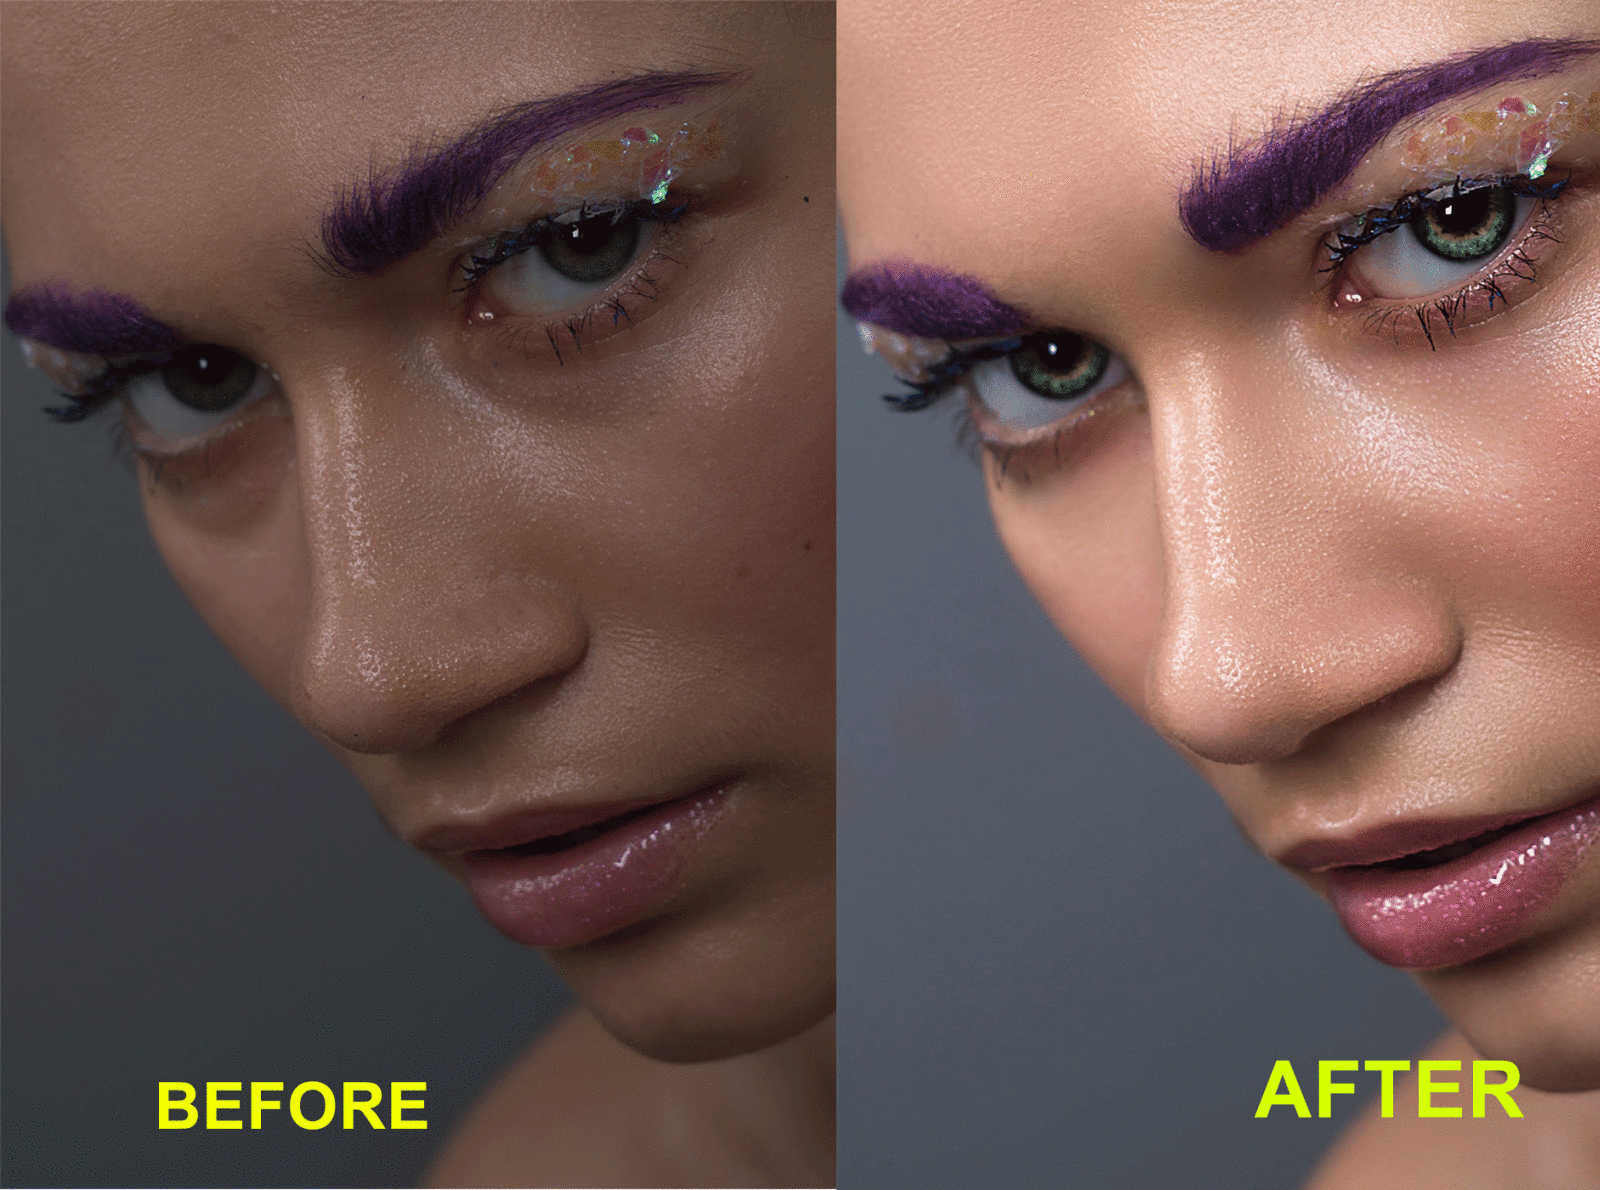 Retouching services professionally background removal clippingpath cropping design editing illustration photographer product photo editing remove background resizing transparent vector